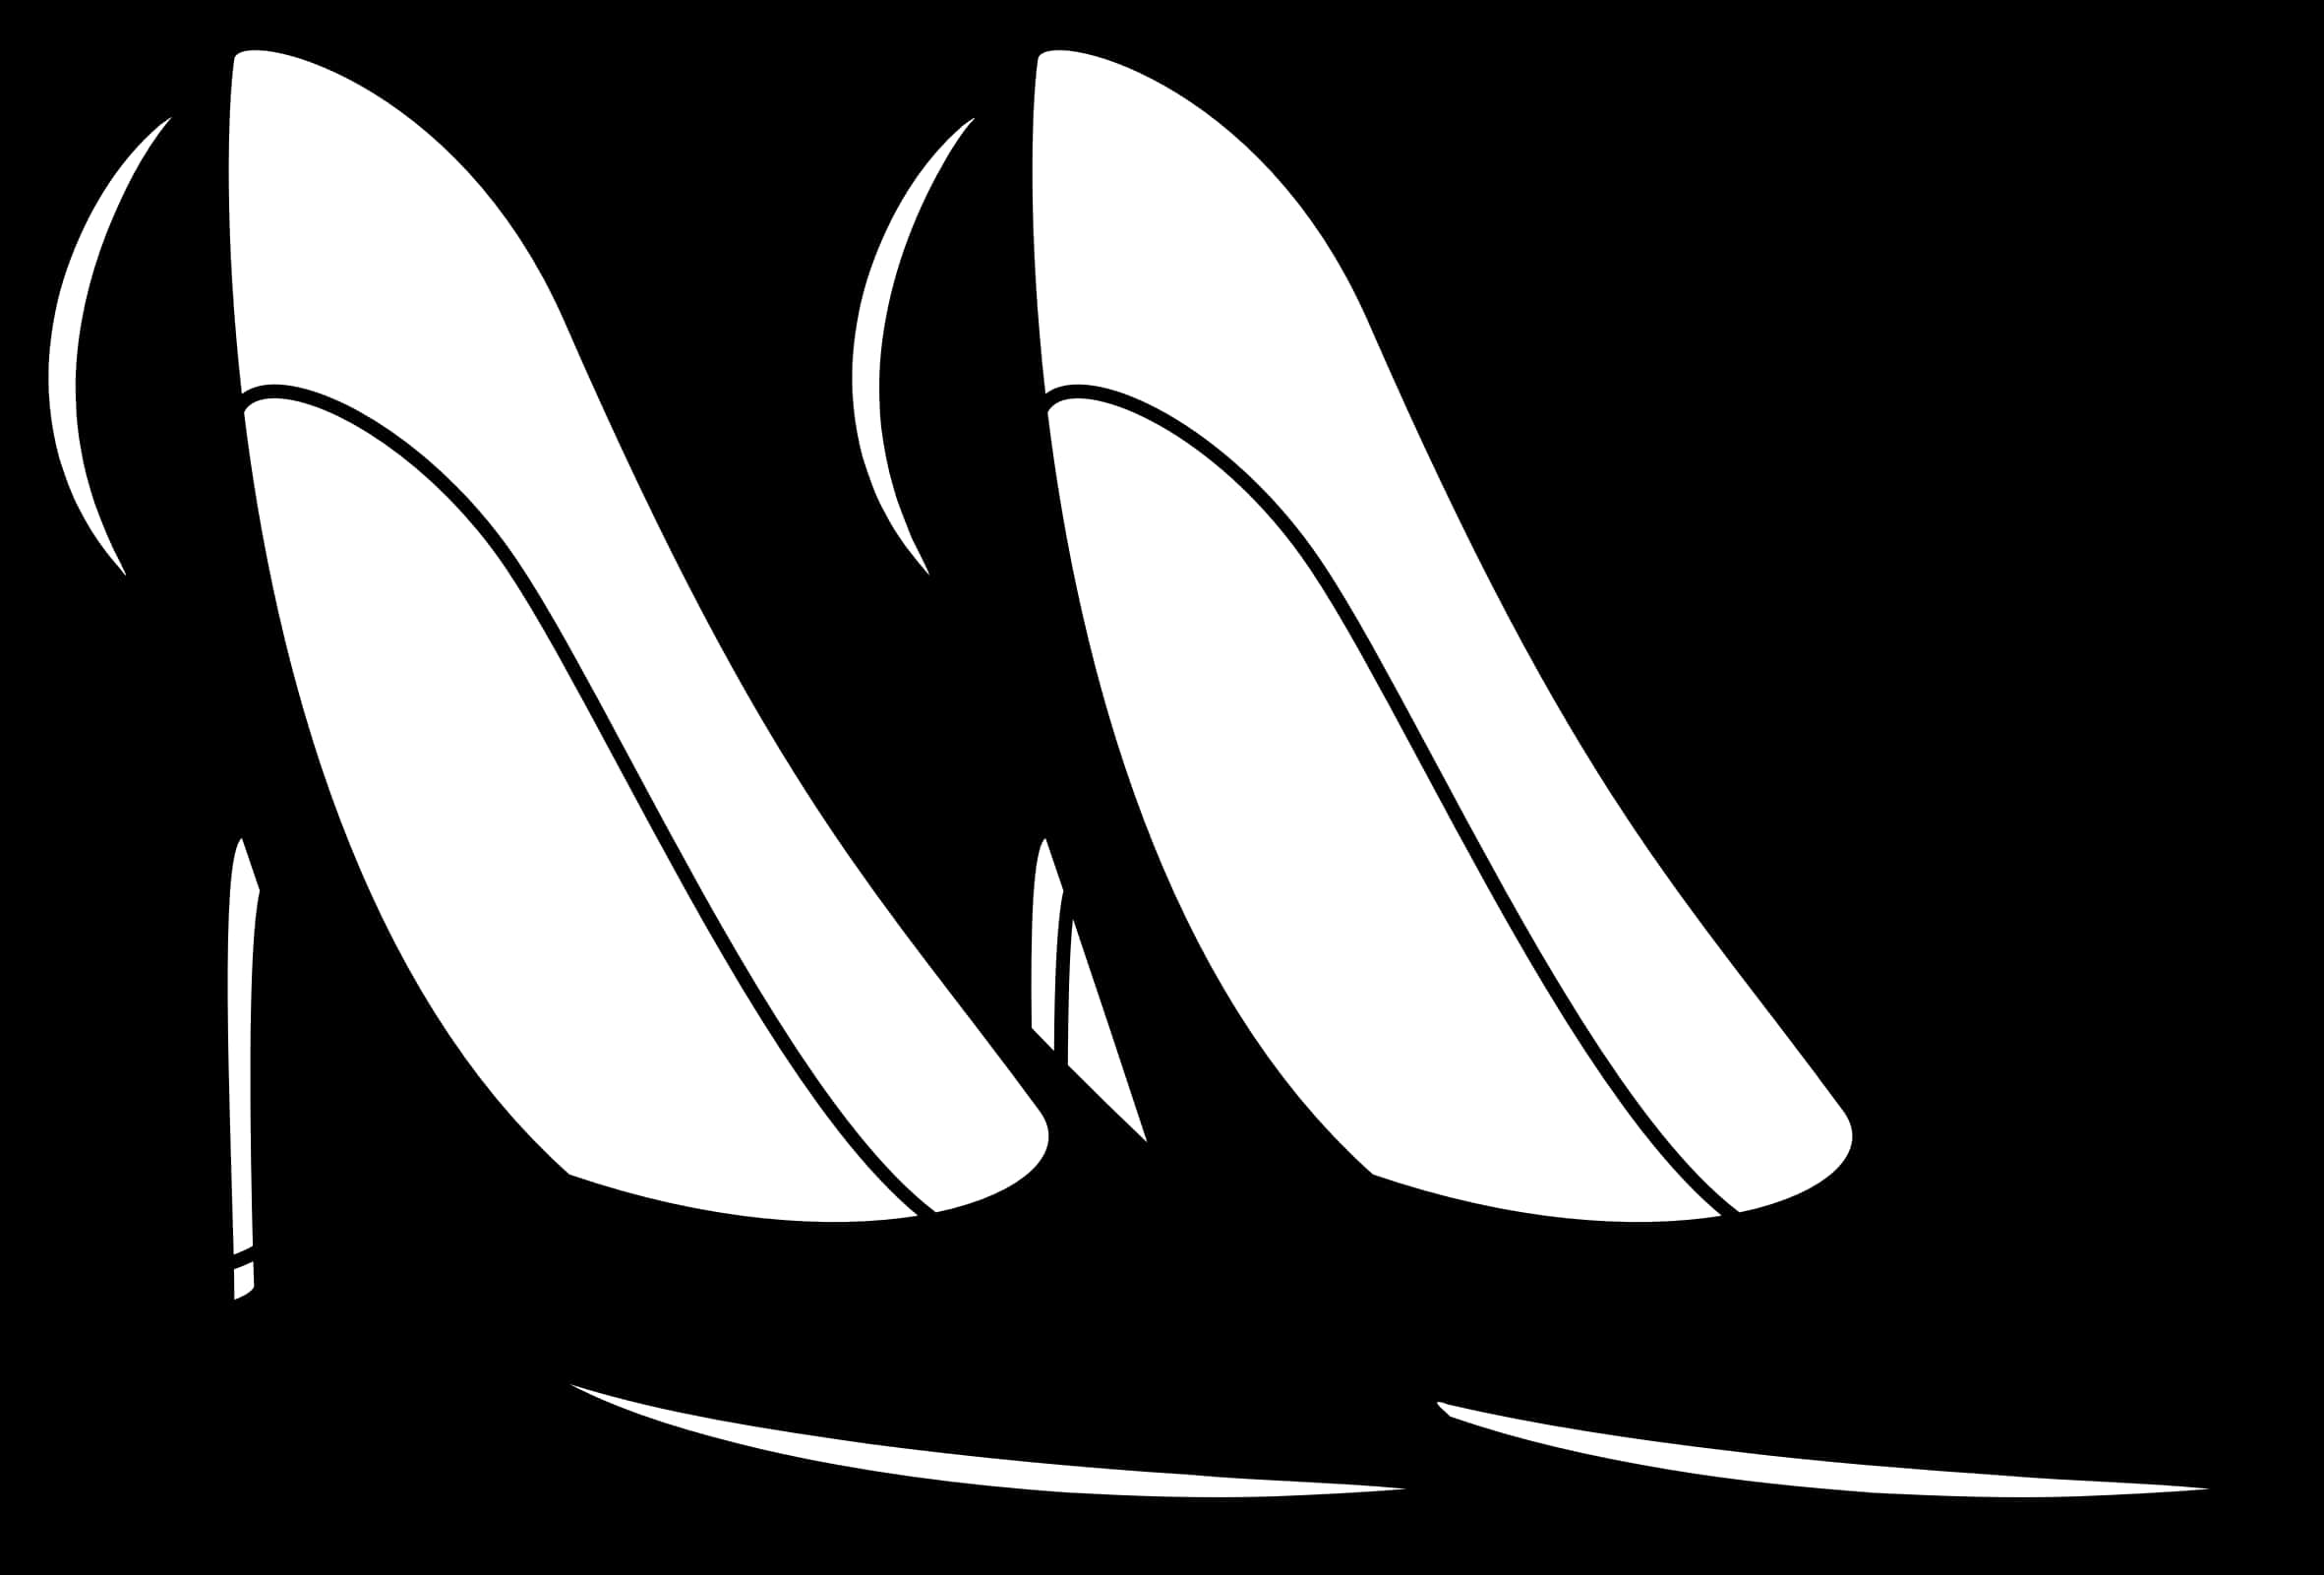 High Heel Silhouette Graphic PNG image